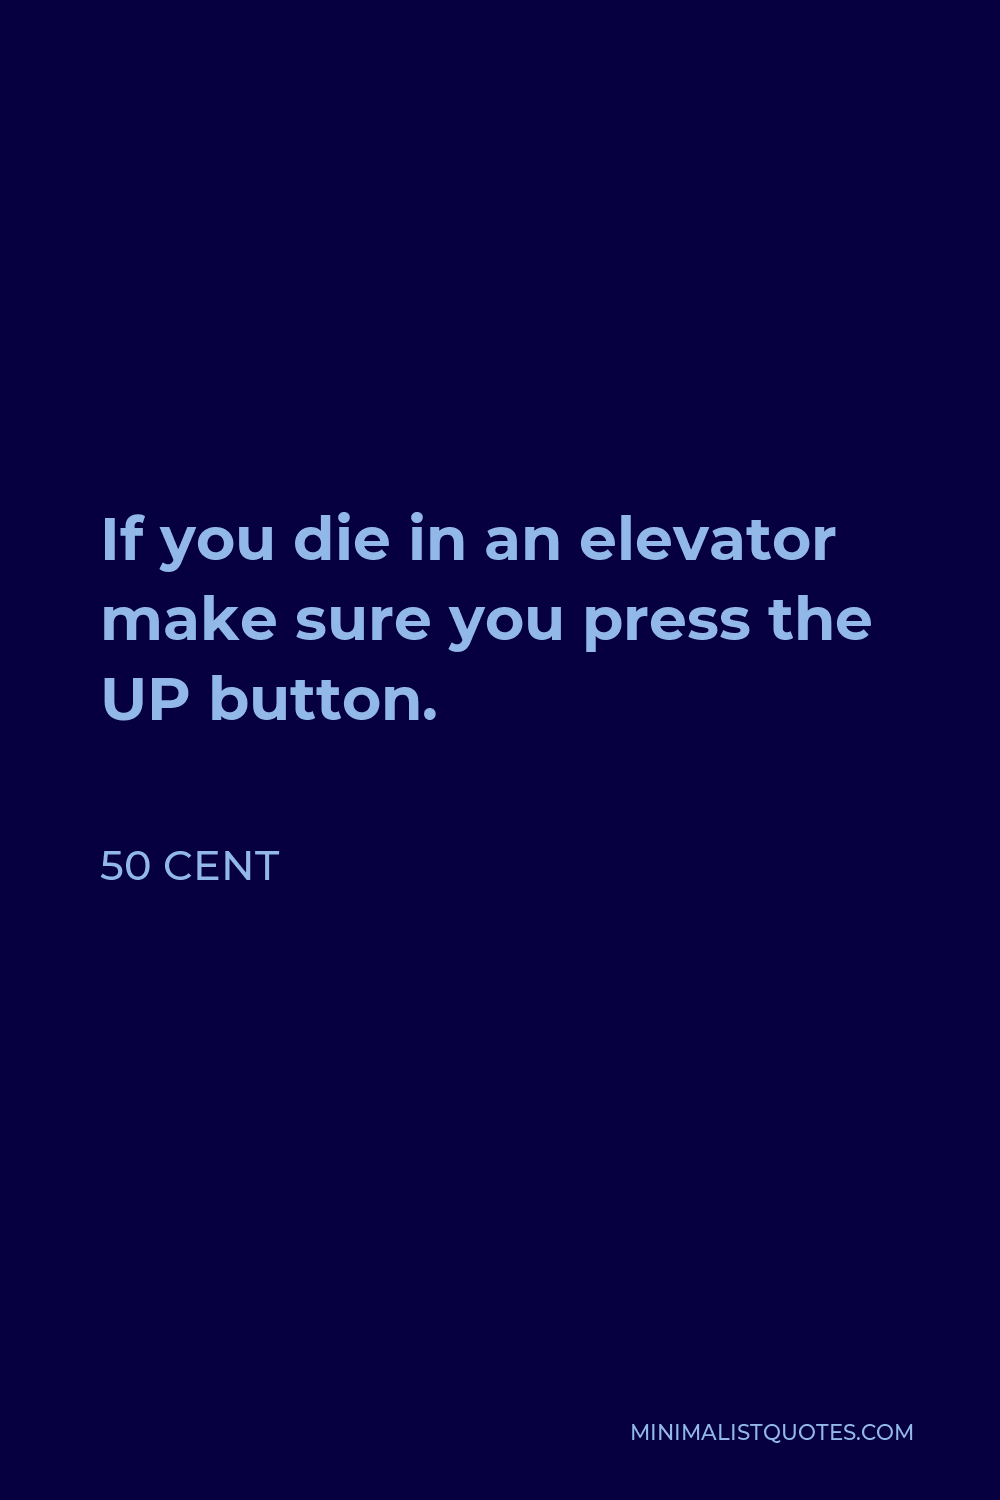 50 Cent Quote - If you die in an elevator make sure you press the UP button.